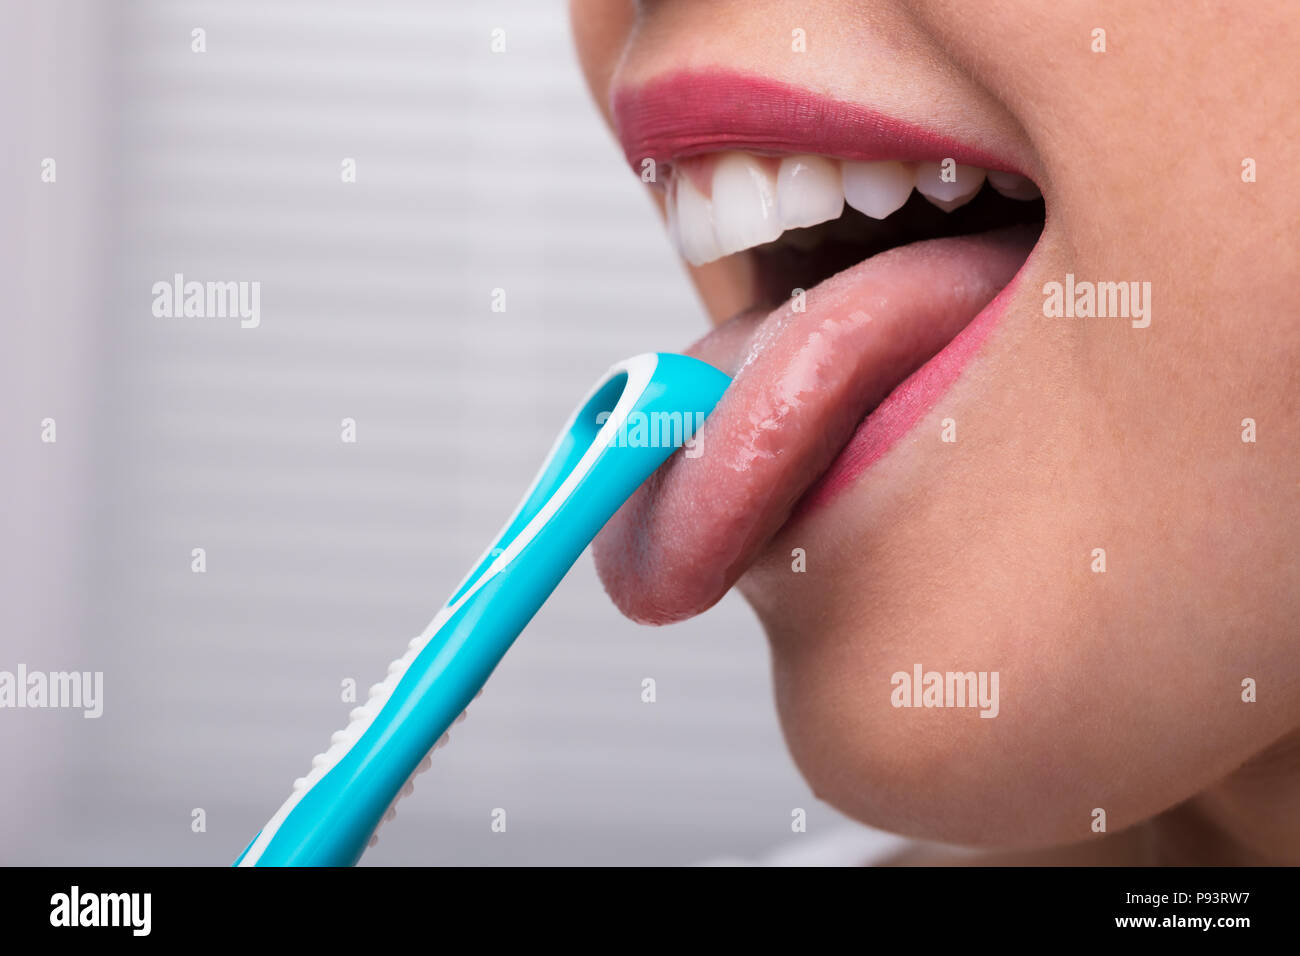 Close-up Of A Woman Cleaning Her Tongue With Cleaner Stock Photo